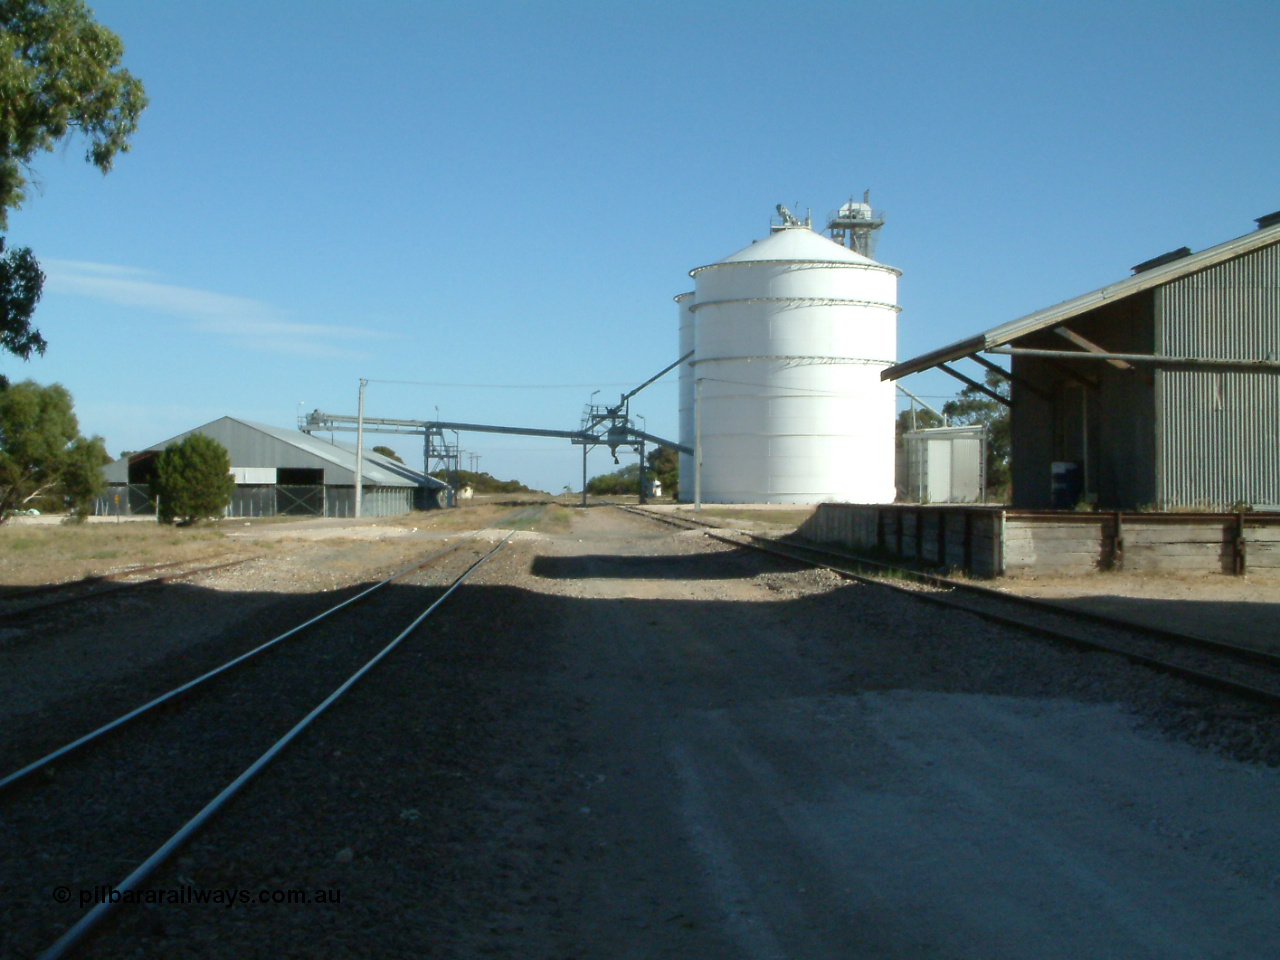 030405 155516
Lock, yard overview looking south along the mainline, horizontal grain shed with siding on the left, Ascom style silo complex Block 5 with outflow spout on the right with goods shed and platform also visible. 5th April 2003.
